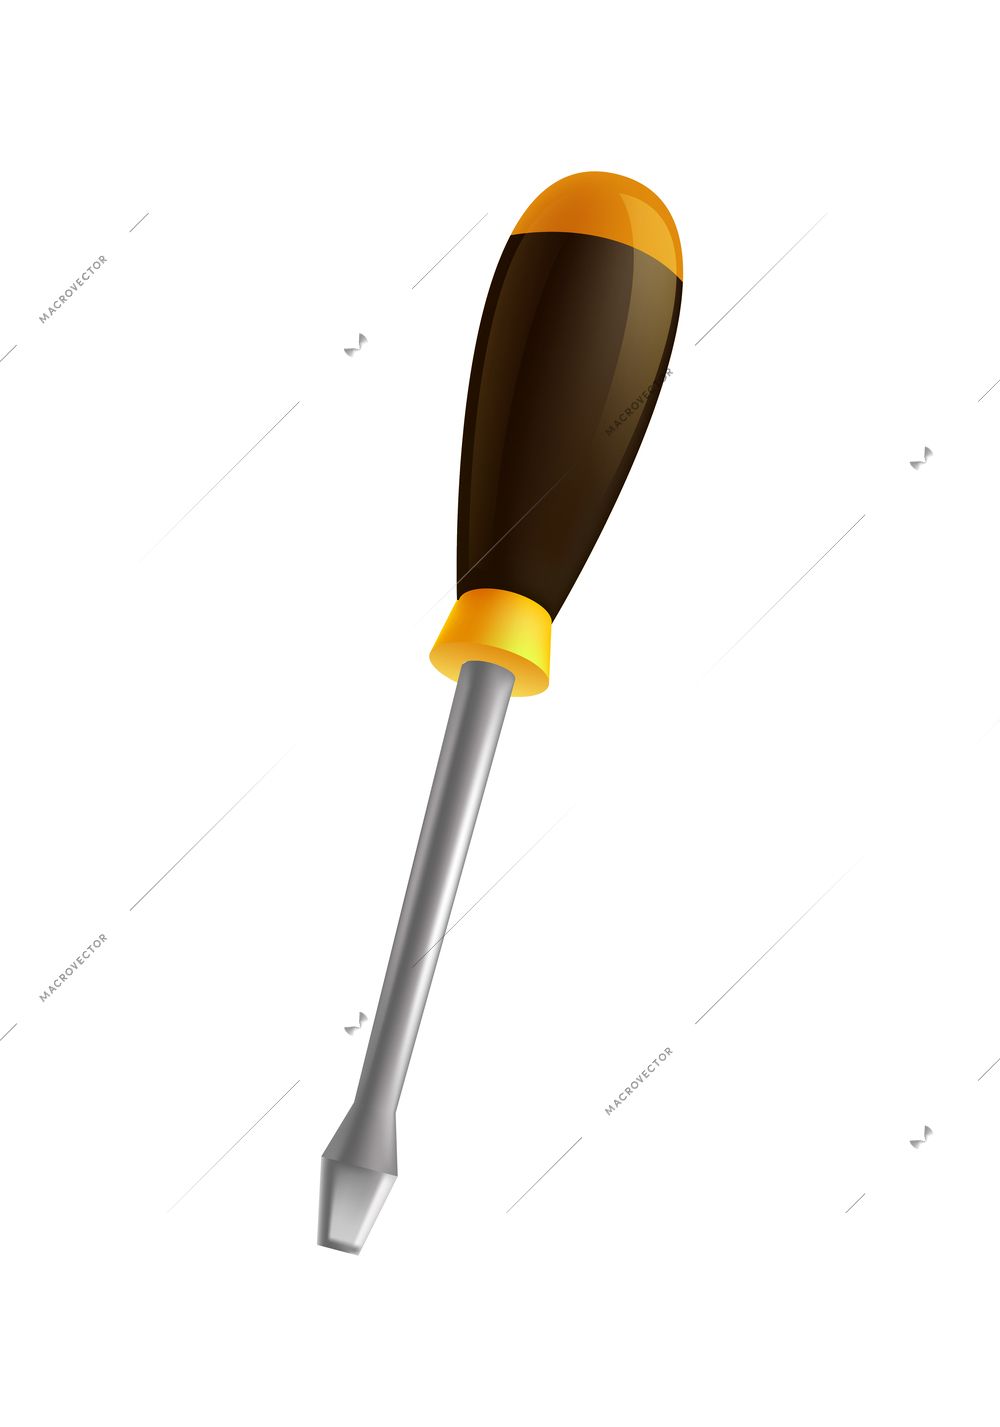 Realistic screwdriver with color handle vector illustration